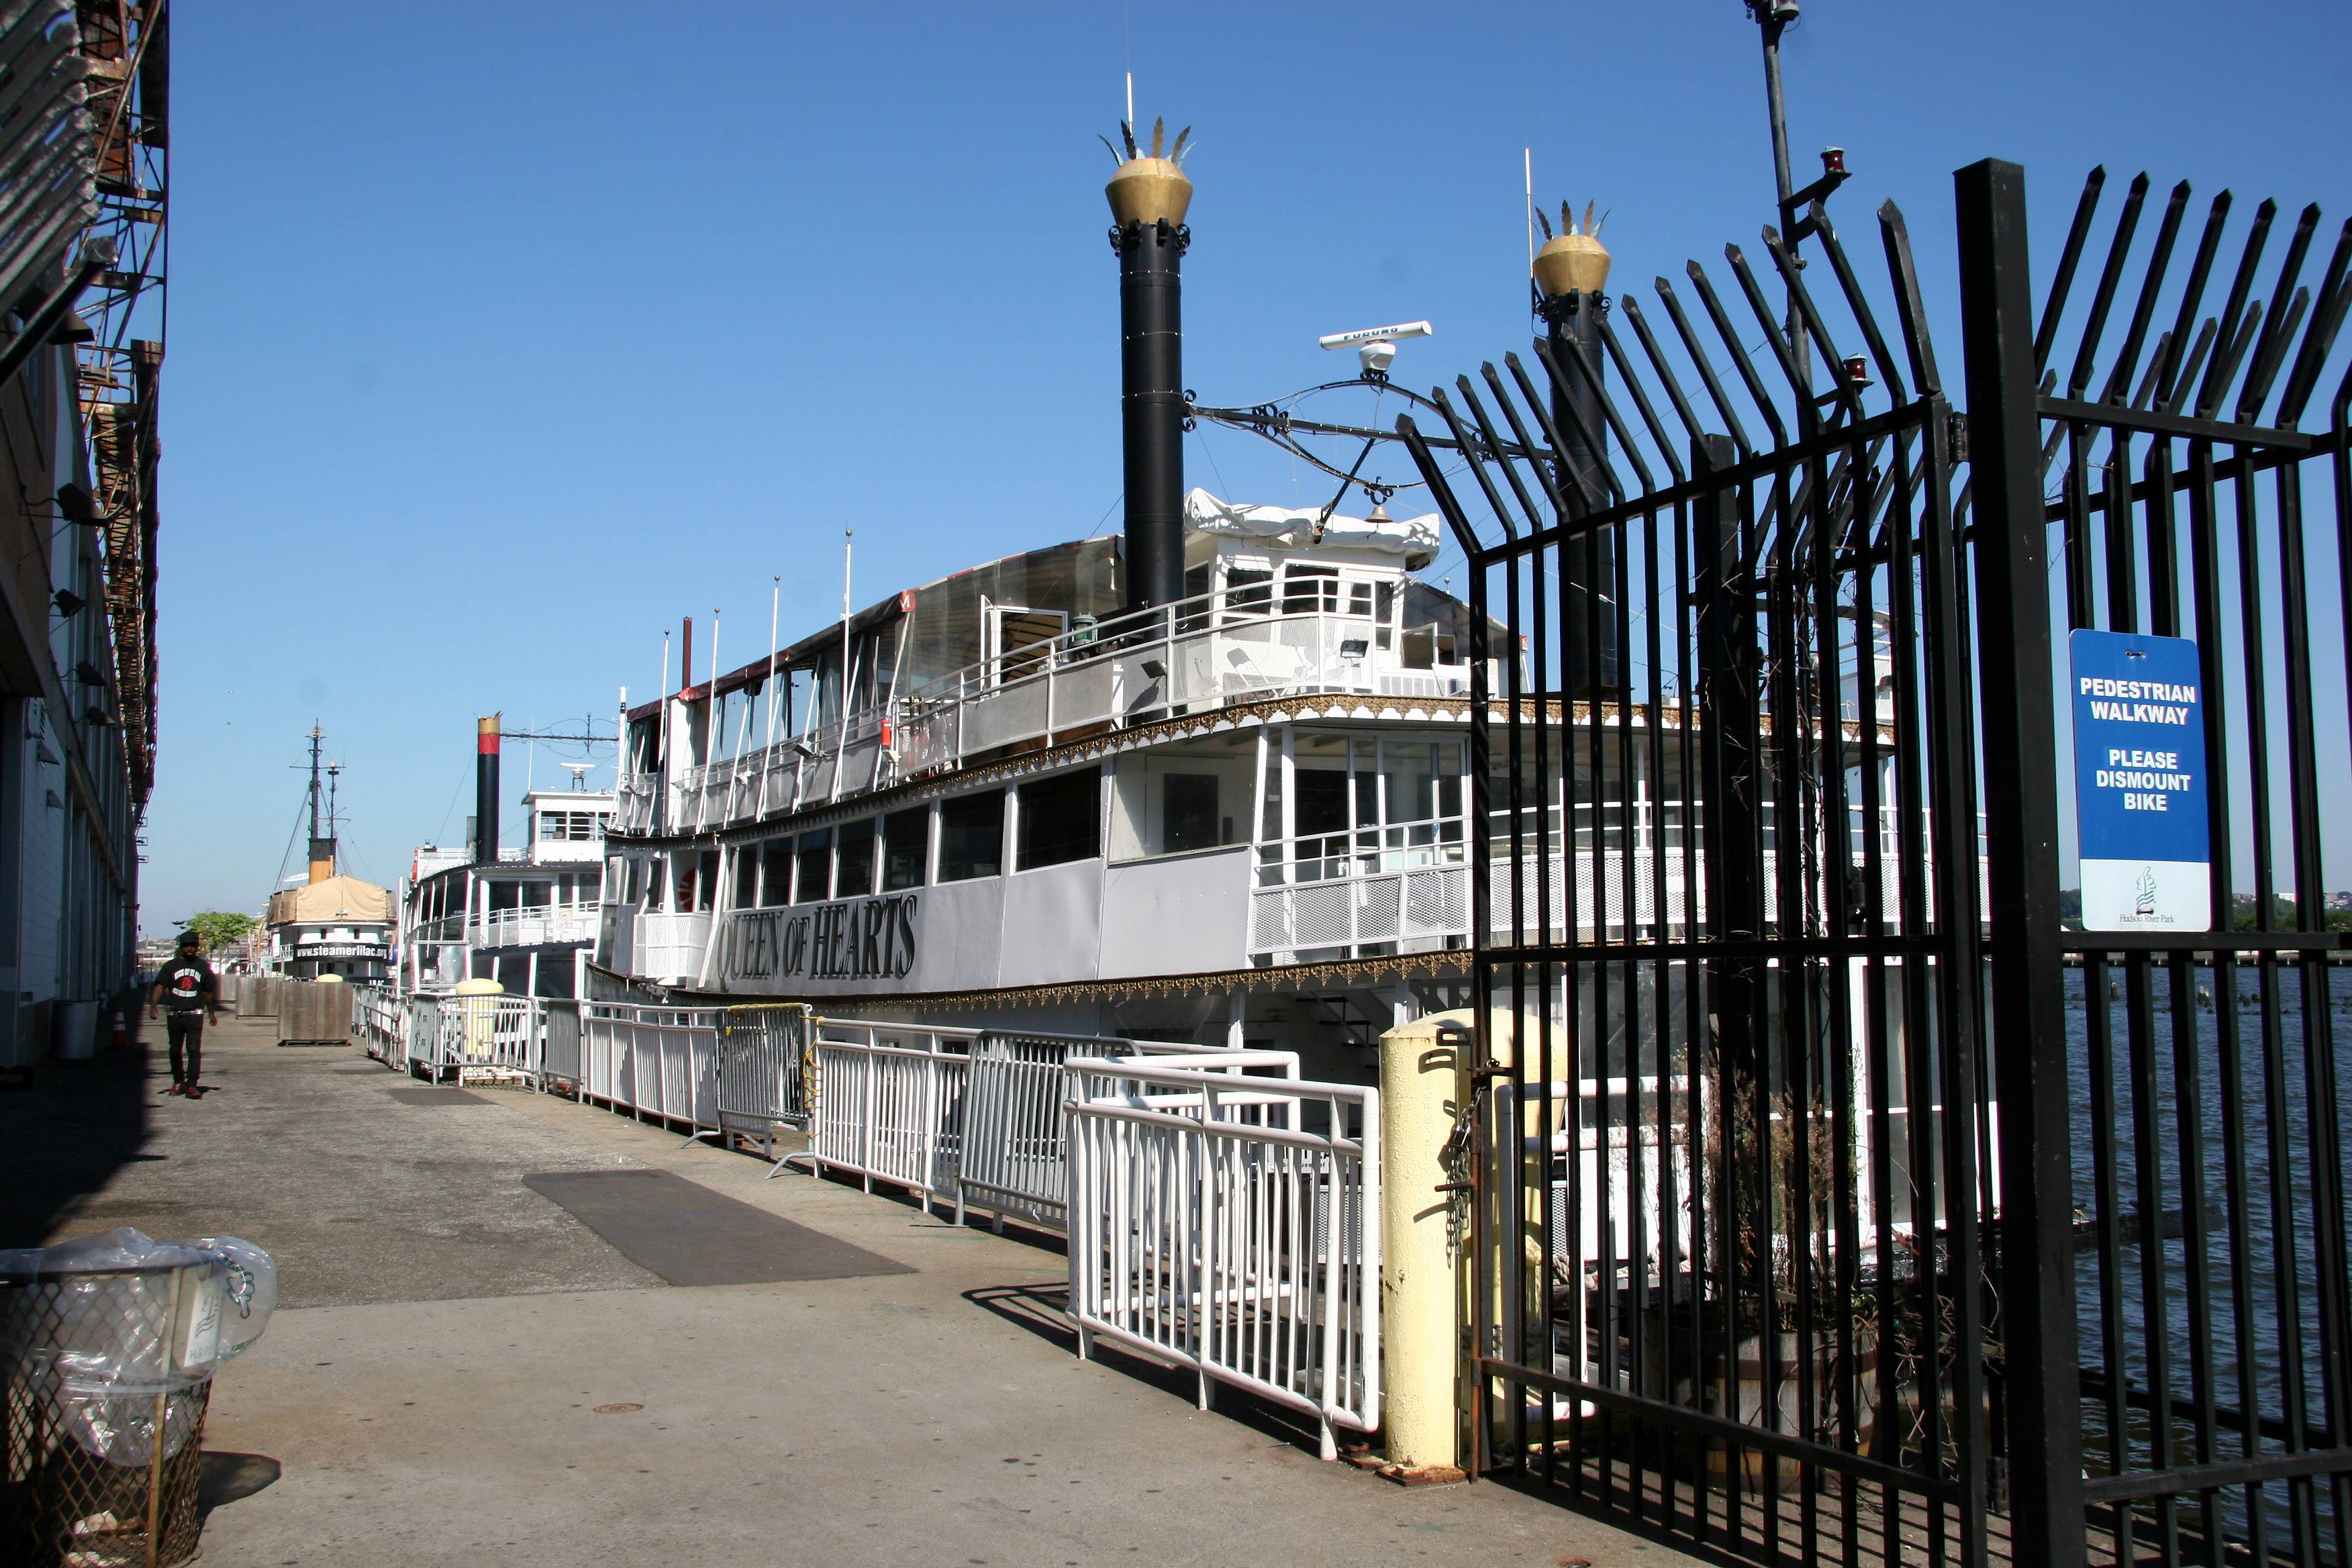 Queen of Hearts River Boat at Pier 40